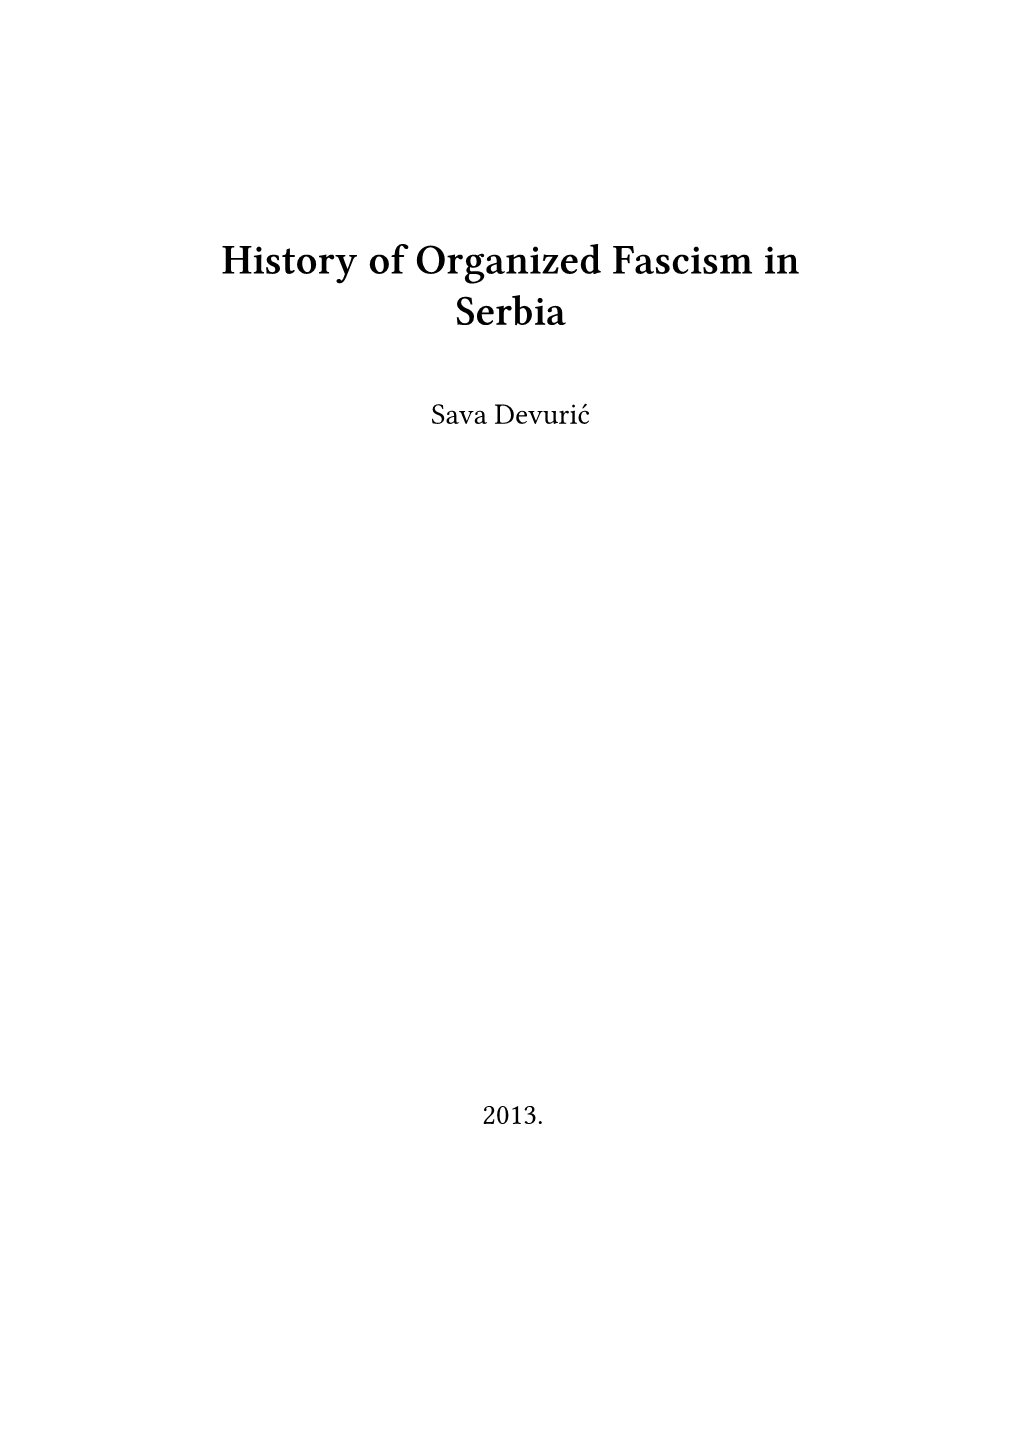 History of Organized Fascism in Serbia